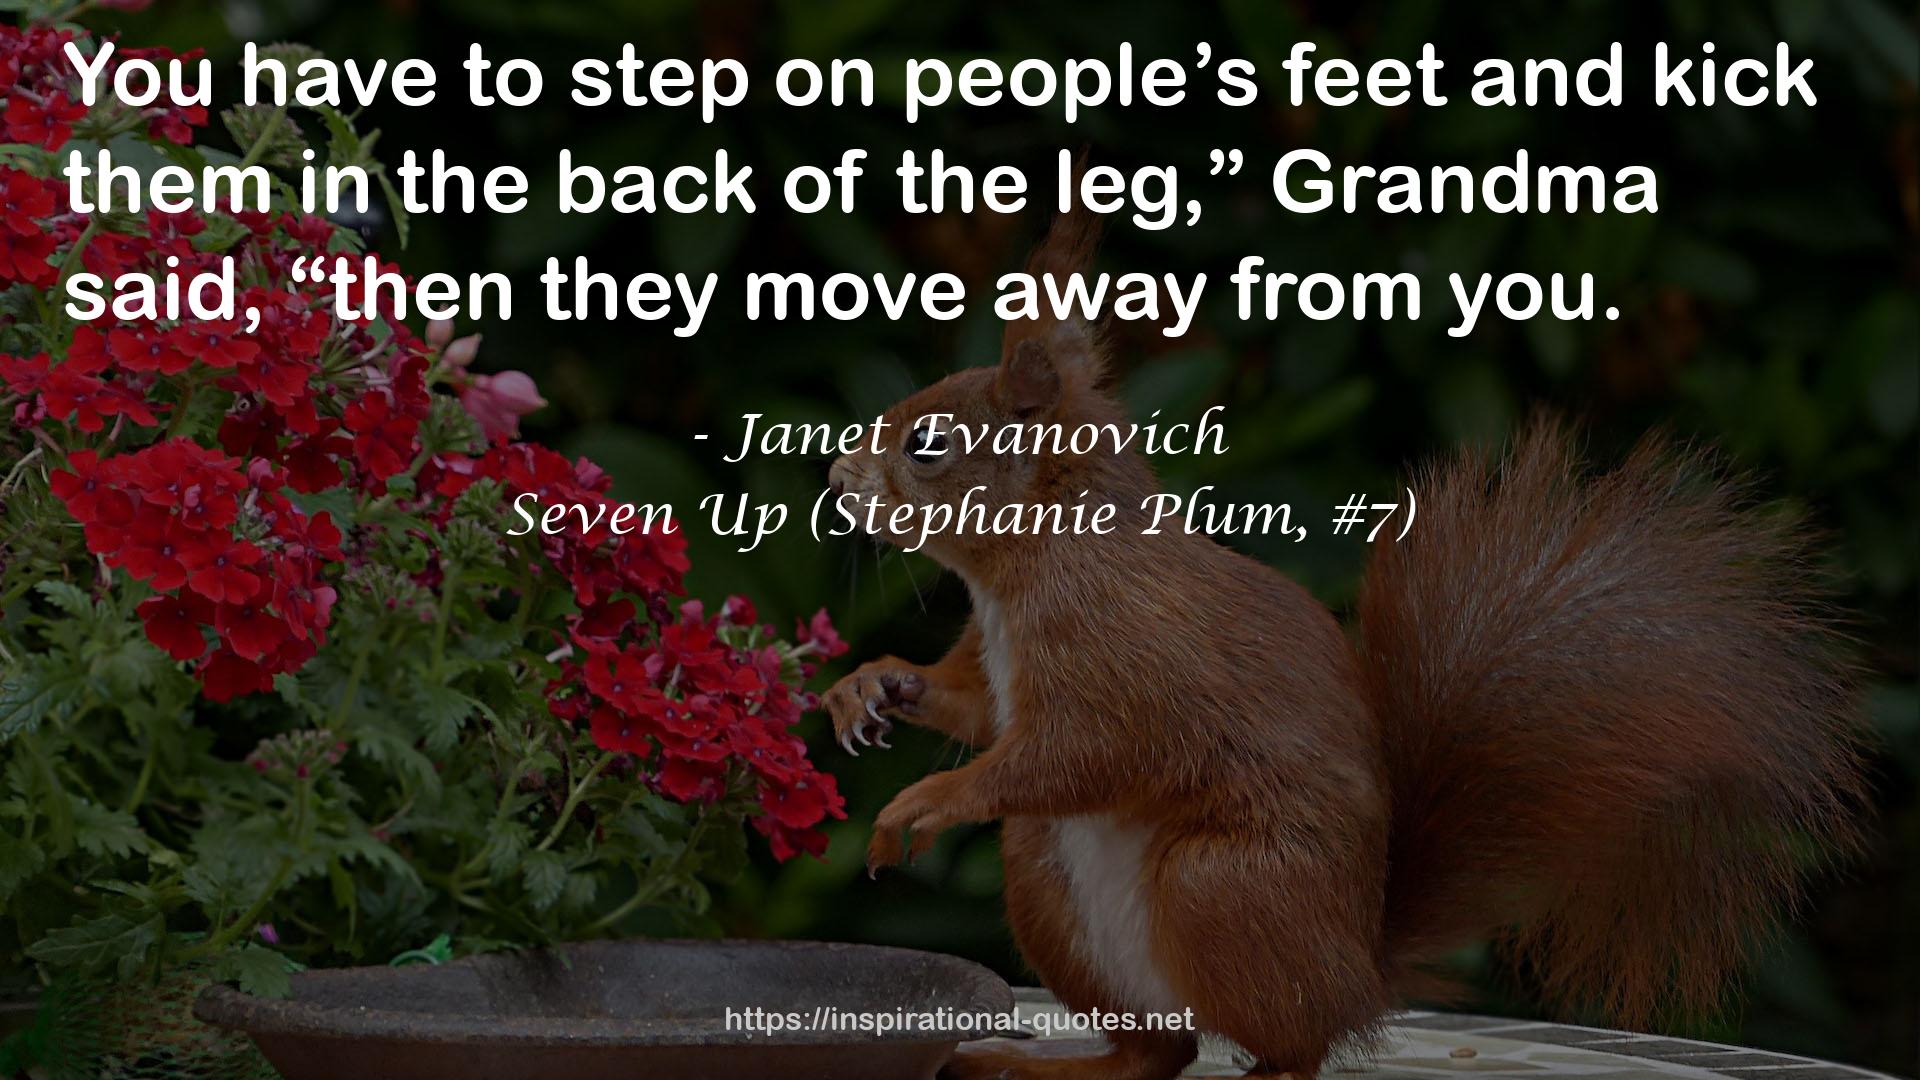 Seven Up (Stephanie Plum, #7) QUOTES